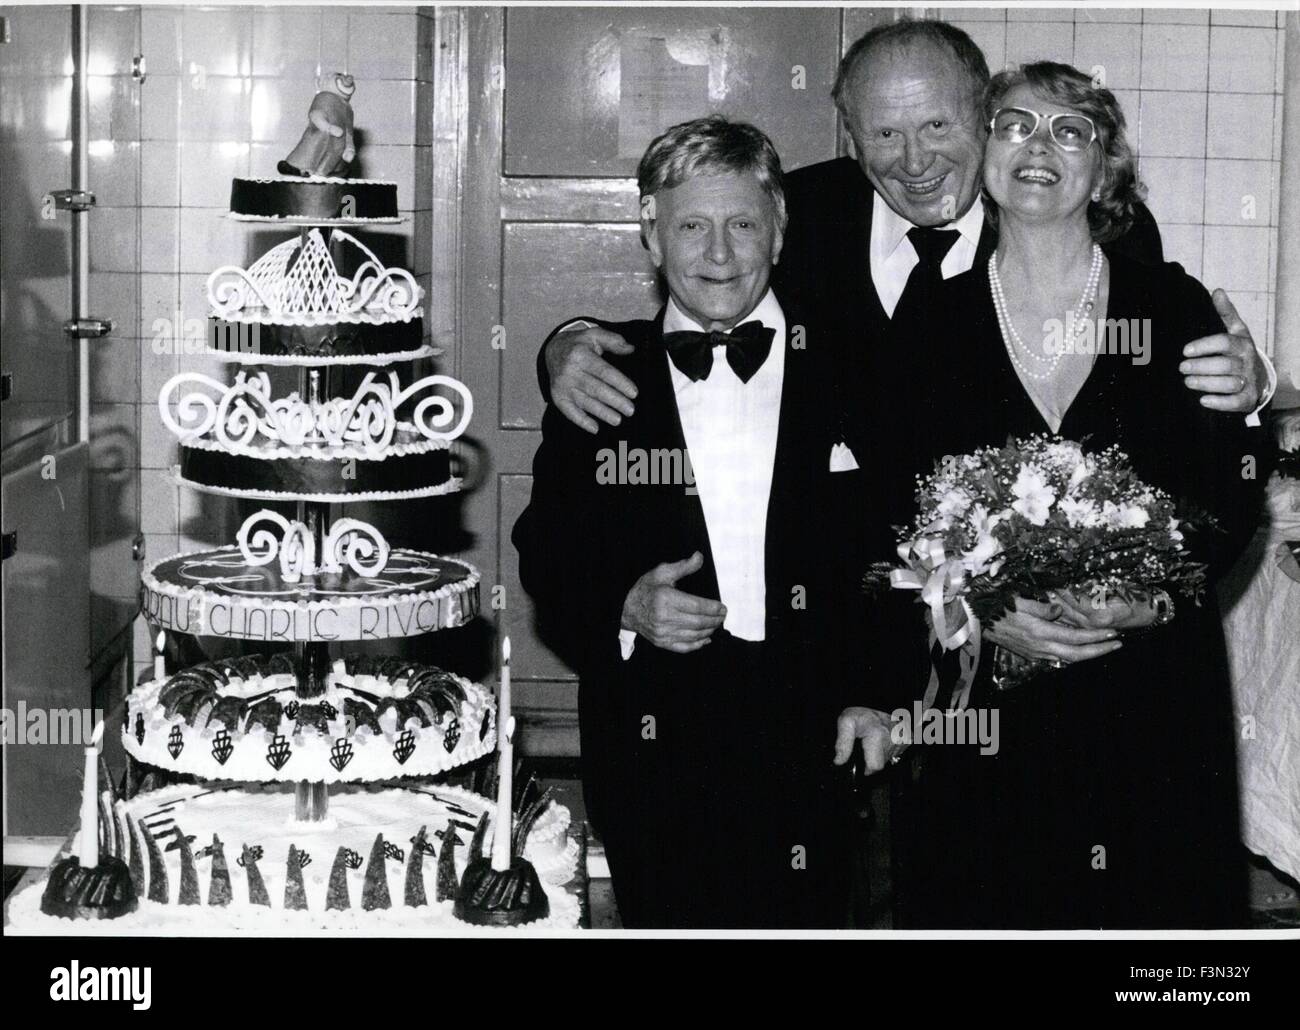 April 24, 1978 - In Munich Charlie Rivel Celebrated His Birthday - And His Engagement: A special date was April 24th, 1978 for Charlie Rivel; the date of his 82nd birthday and his engagement The bride elect, the greatest clown of the world wants to marry (somewhere in Spain) as soon as possible, is Luise Katharina Thomalla, 52-year-old and the sister-in-law of the German actor Georg Thomalla. charlie knew her since years, lost sight of her and now - found her for ever Charlie Rivel and his bride are happy, - but many will be sad, e.g. those 3000 ladies, who wrote Charlie, when they heard of h Stock Photo